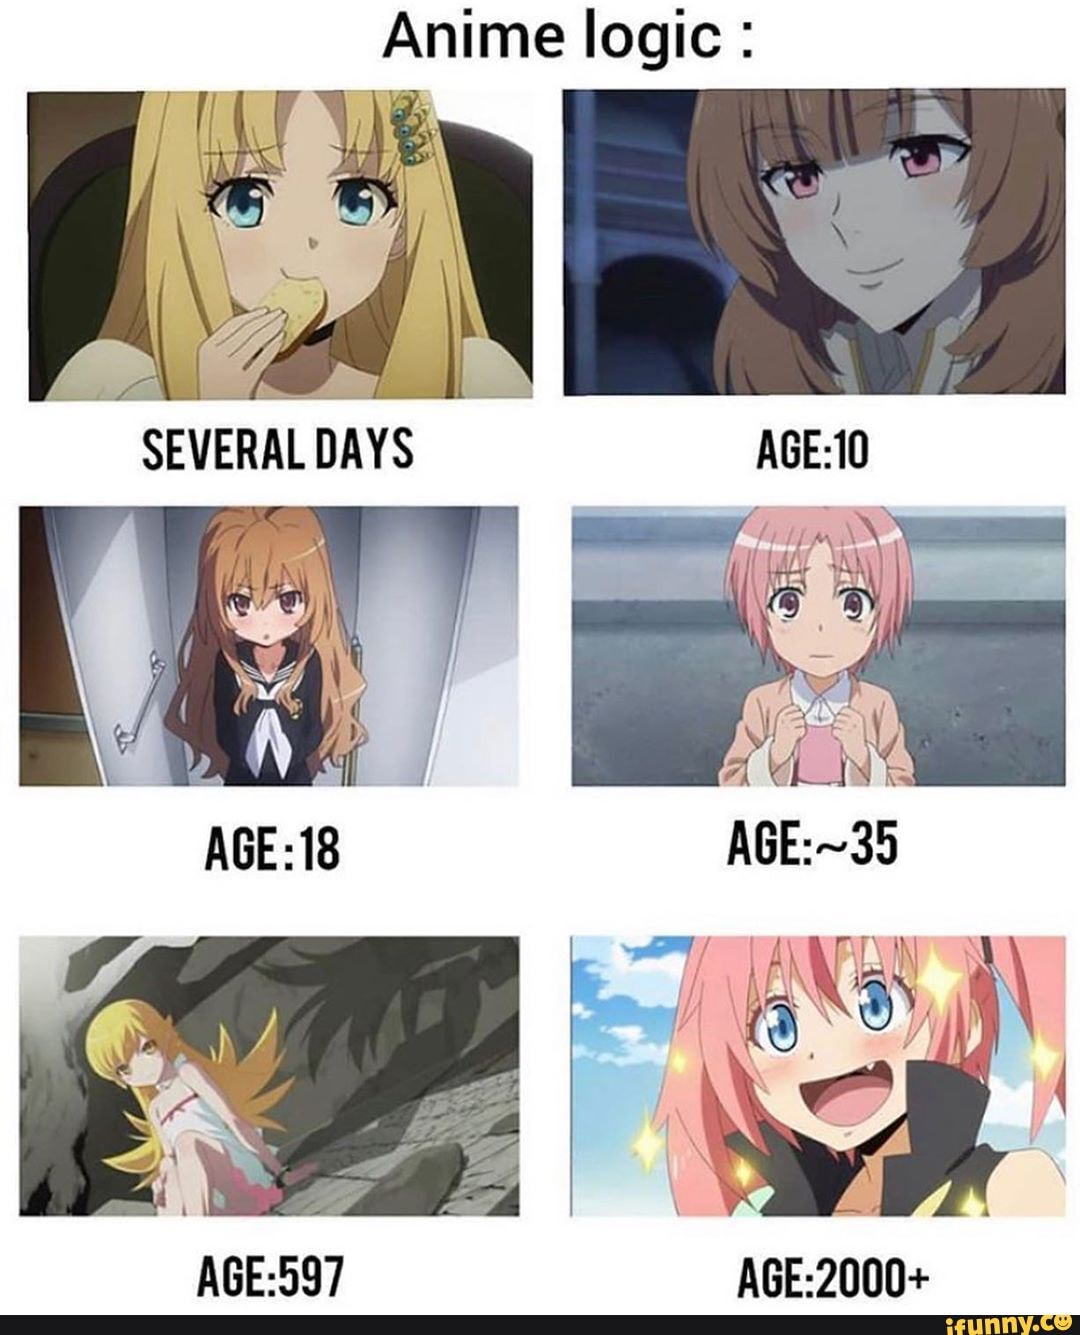 Age is just a number when youre in a anime  roverlord